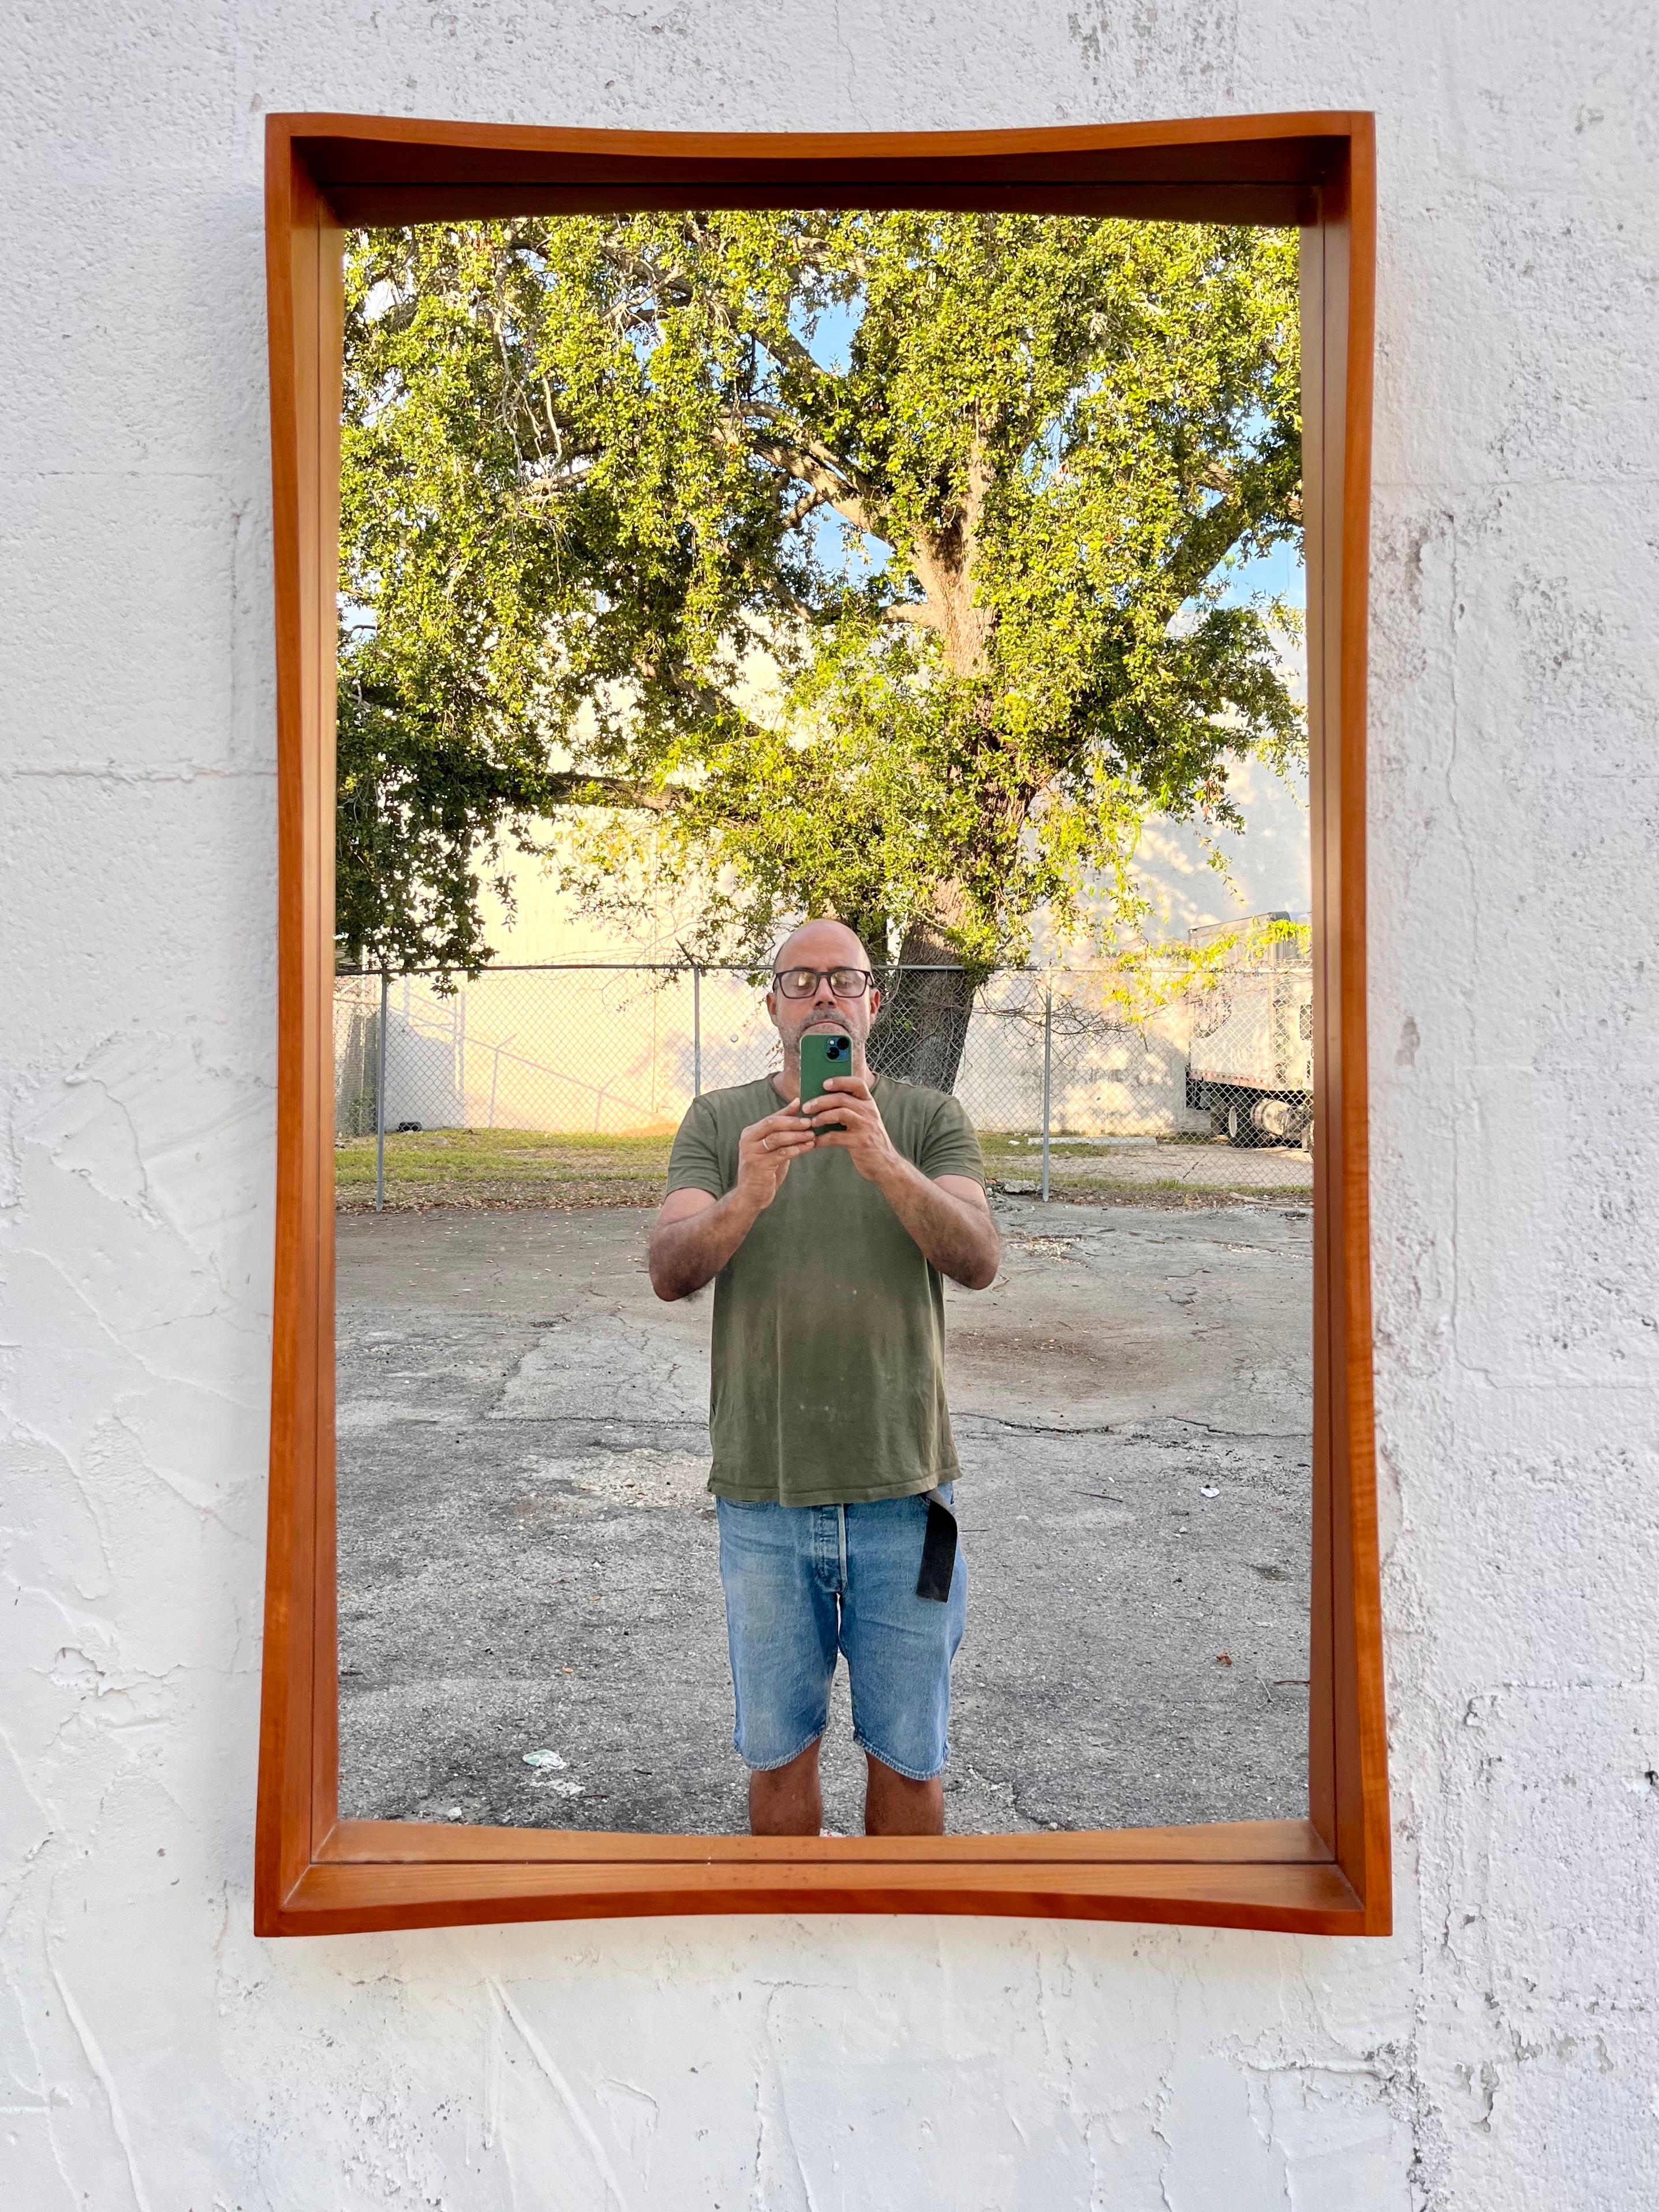 Large Vintage Mid Century Danish Modern Pedersen & Hansen entry wall mirror. Circa 1960s.
Features a Scandinavian Modern Minimalist design, a slender solid teak wood rectangle frame, and finger jointed corners. 
A slender entry mirror with a thin